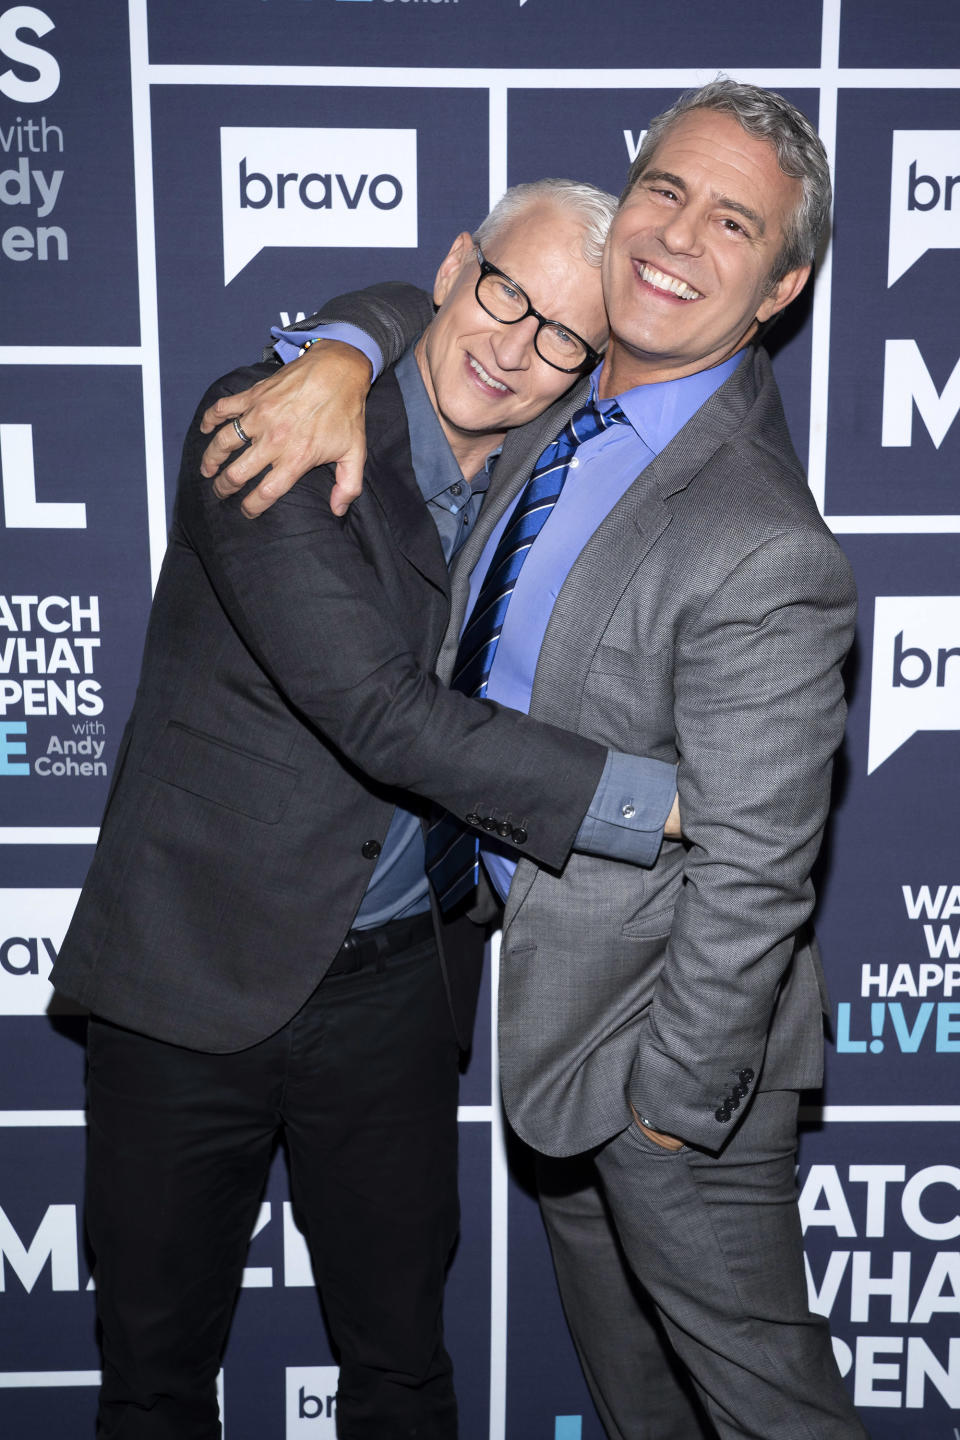 WATCH WHAT HAPPENS LIVE WITH ANDY COHEN -- Episode 18150 -- Pictured: (l-r) Anderson Cooper, Andy Cohen -- (Photo by: Charles Sykes/Bravo/NBCU Photo Bank via Getty Images)